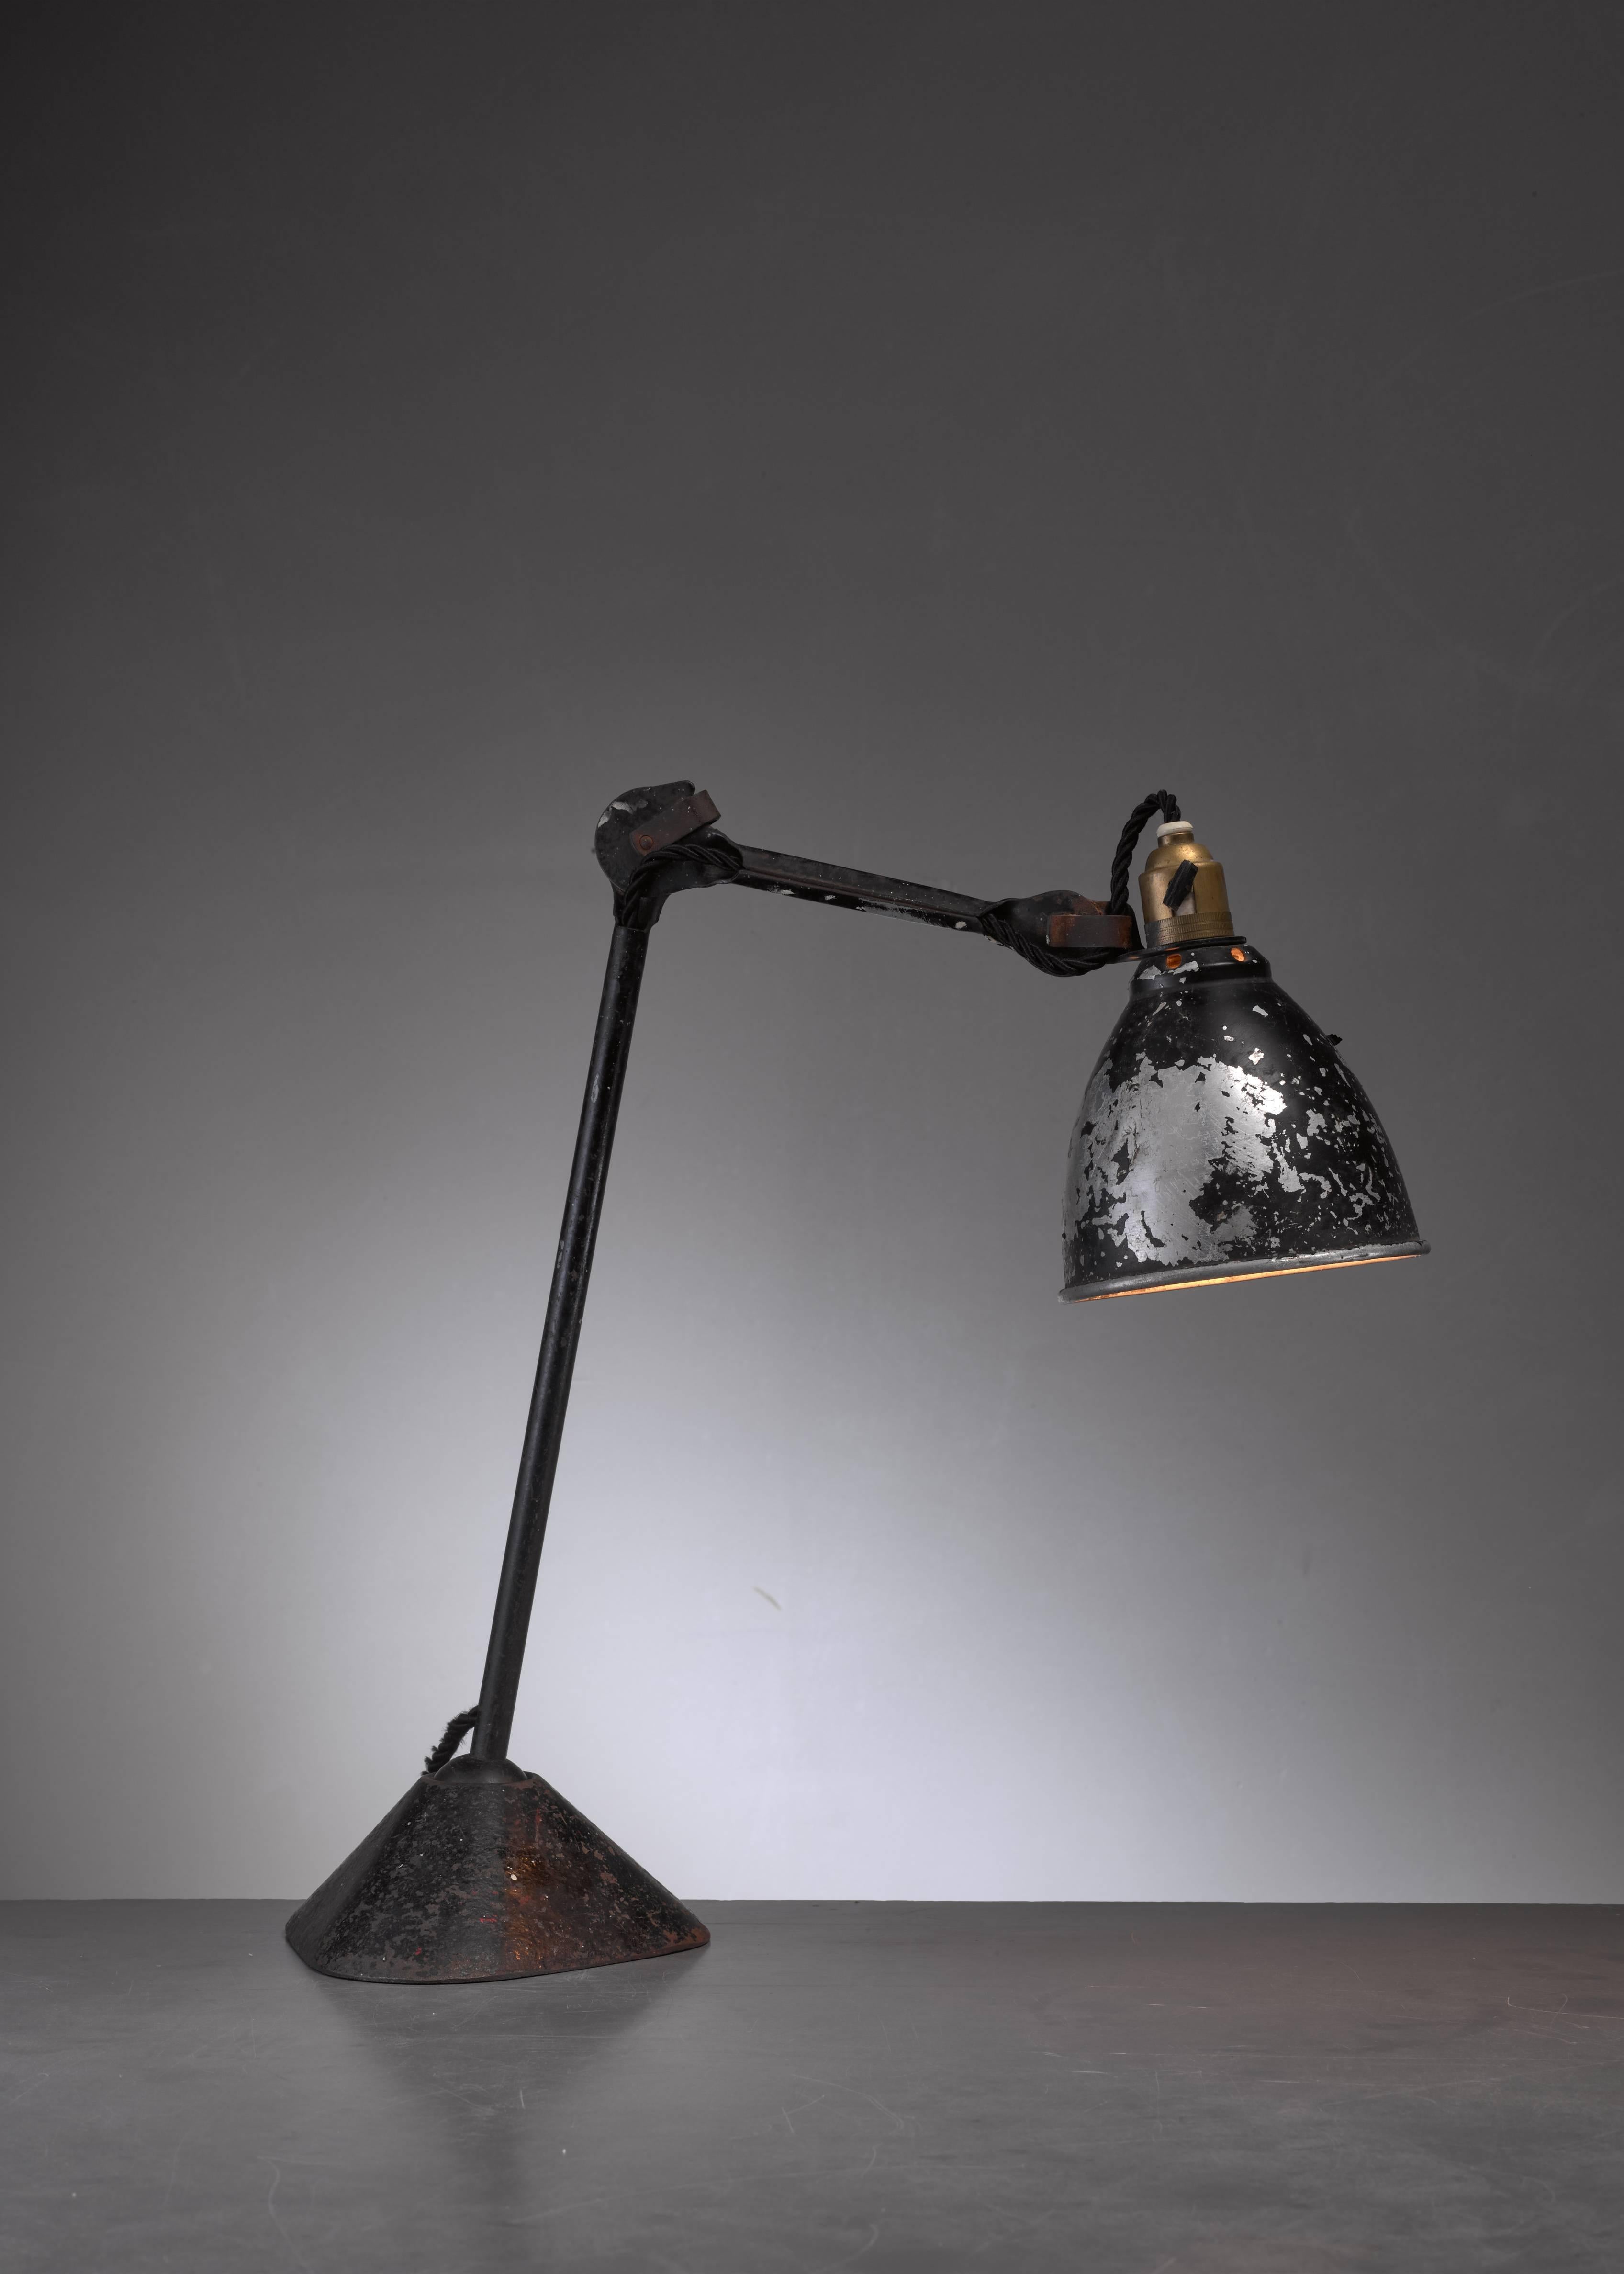 The iconic Lampe Gras model 205 table lamp was designed in 1921 by Bernard-Albin Gras and produced by Didier des Gachons & Ravel. The ball-joint connection in the foot allows you to postion the stem in any desired angle.